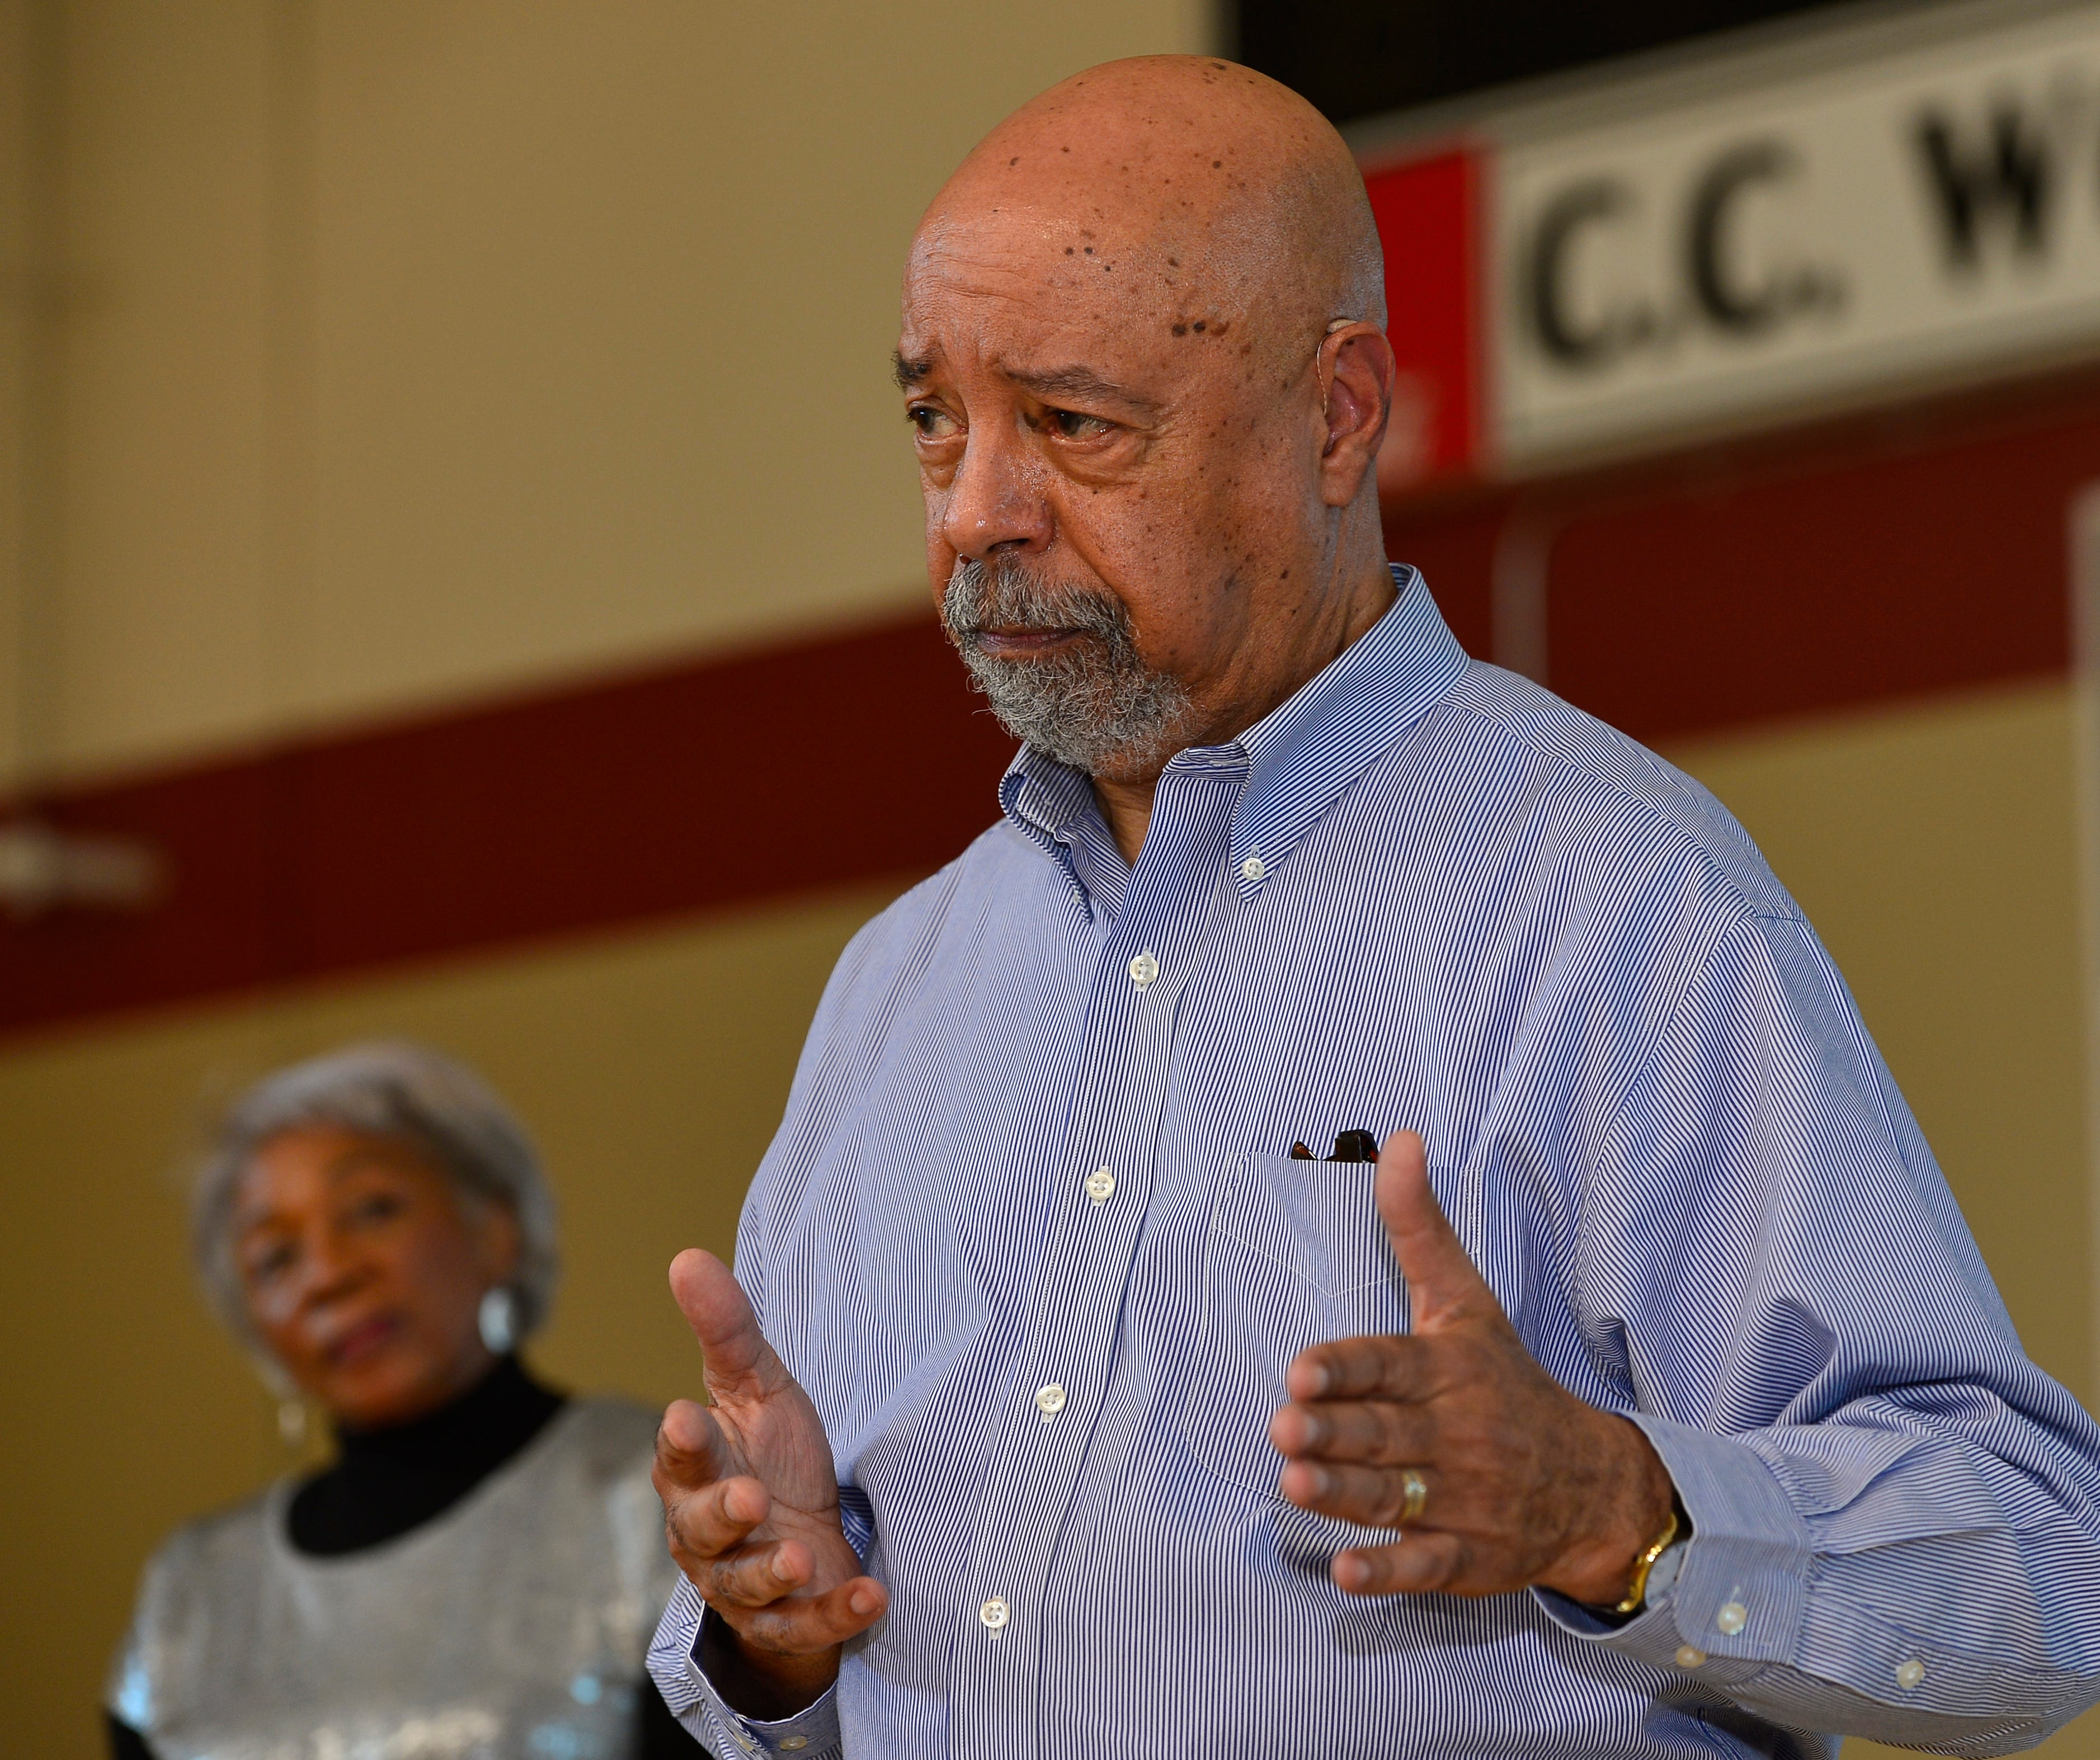 Voting rights advocate Charles Mann of the Spartanburg Local Redistricting Advisory Committee said a big step to boost voter turnout would be to dispel the myth that widespread voter fraud exists.